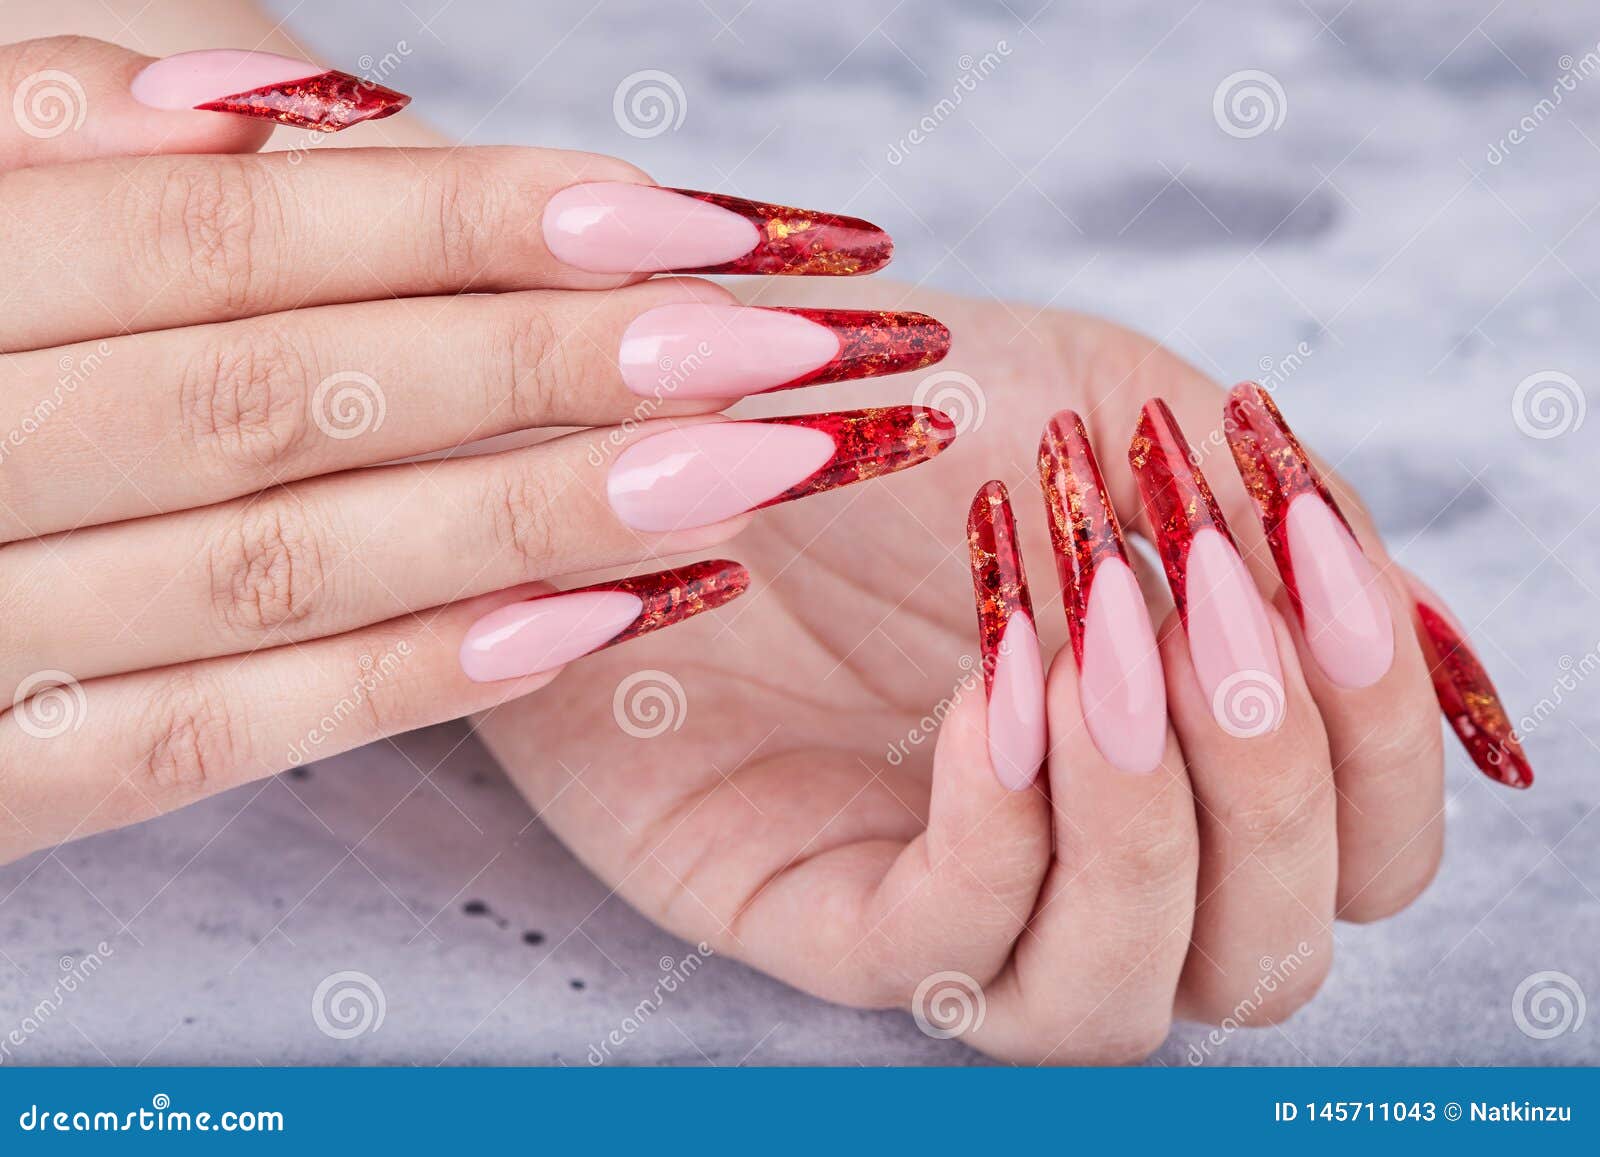 hands with long red artificial french manicured nails